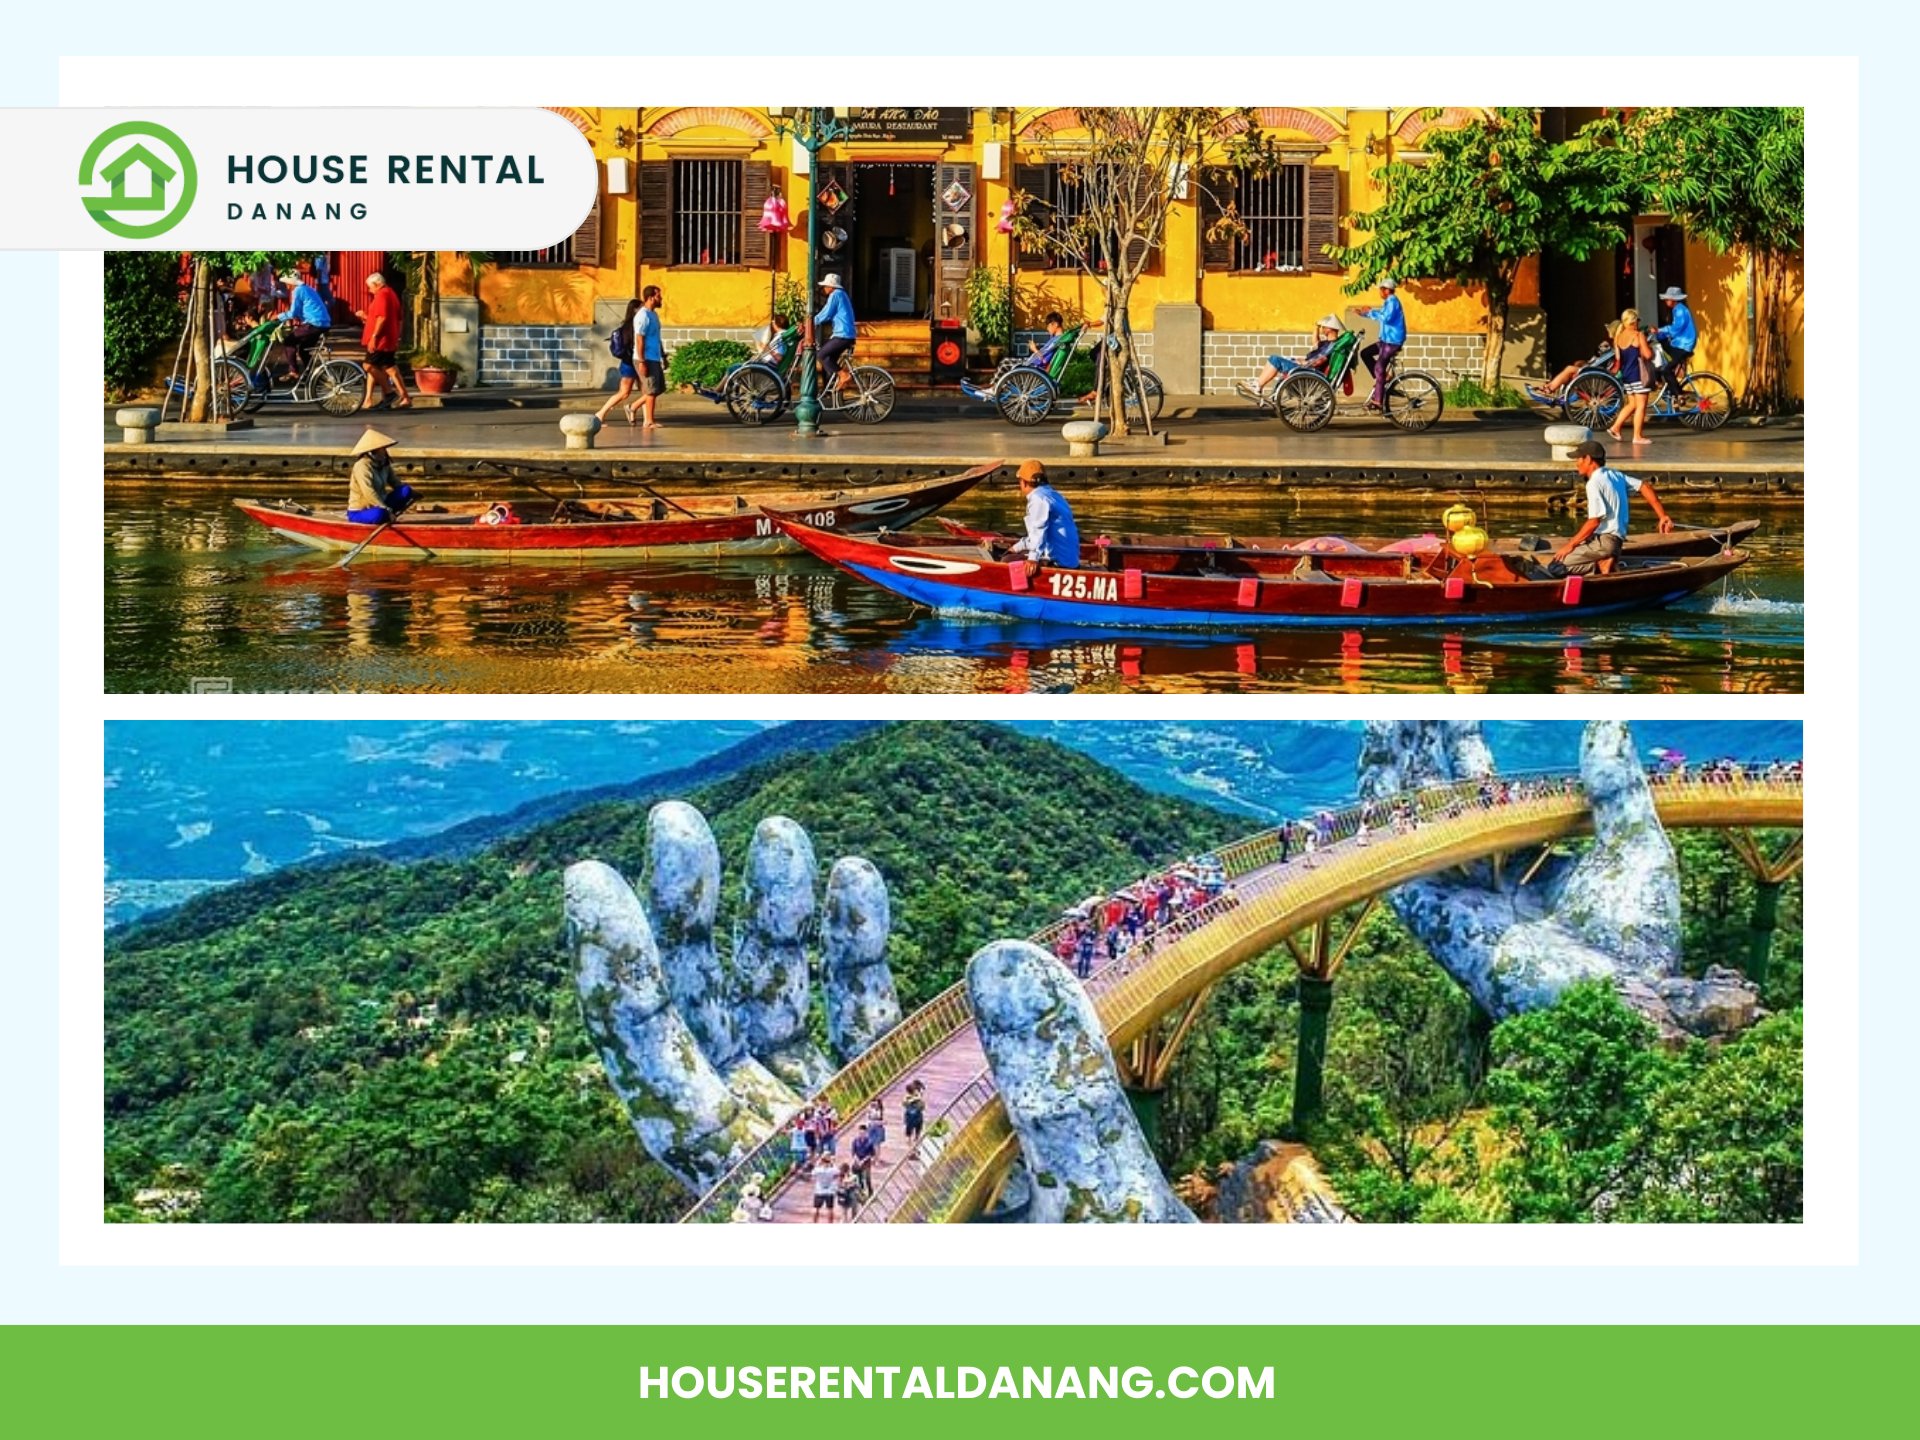 Collage featuring rental boats on a scenic waterway and a pedestrian bridge held by giant hands amidst greenery, with the Marble Mountains Danang in the background. House Rental Danang logo and website URL are displayed.